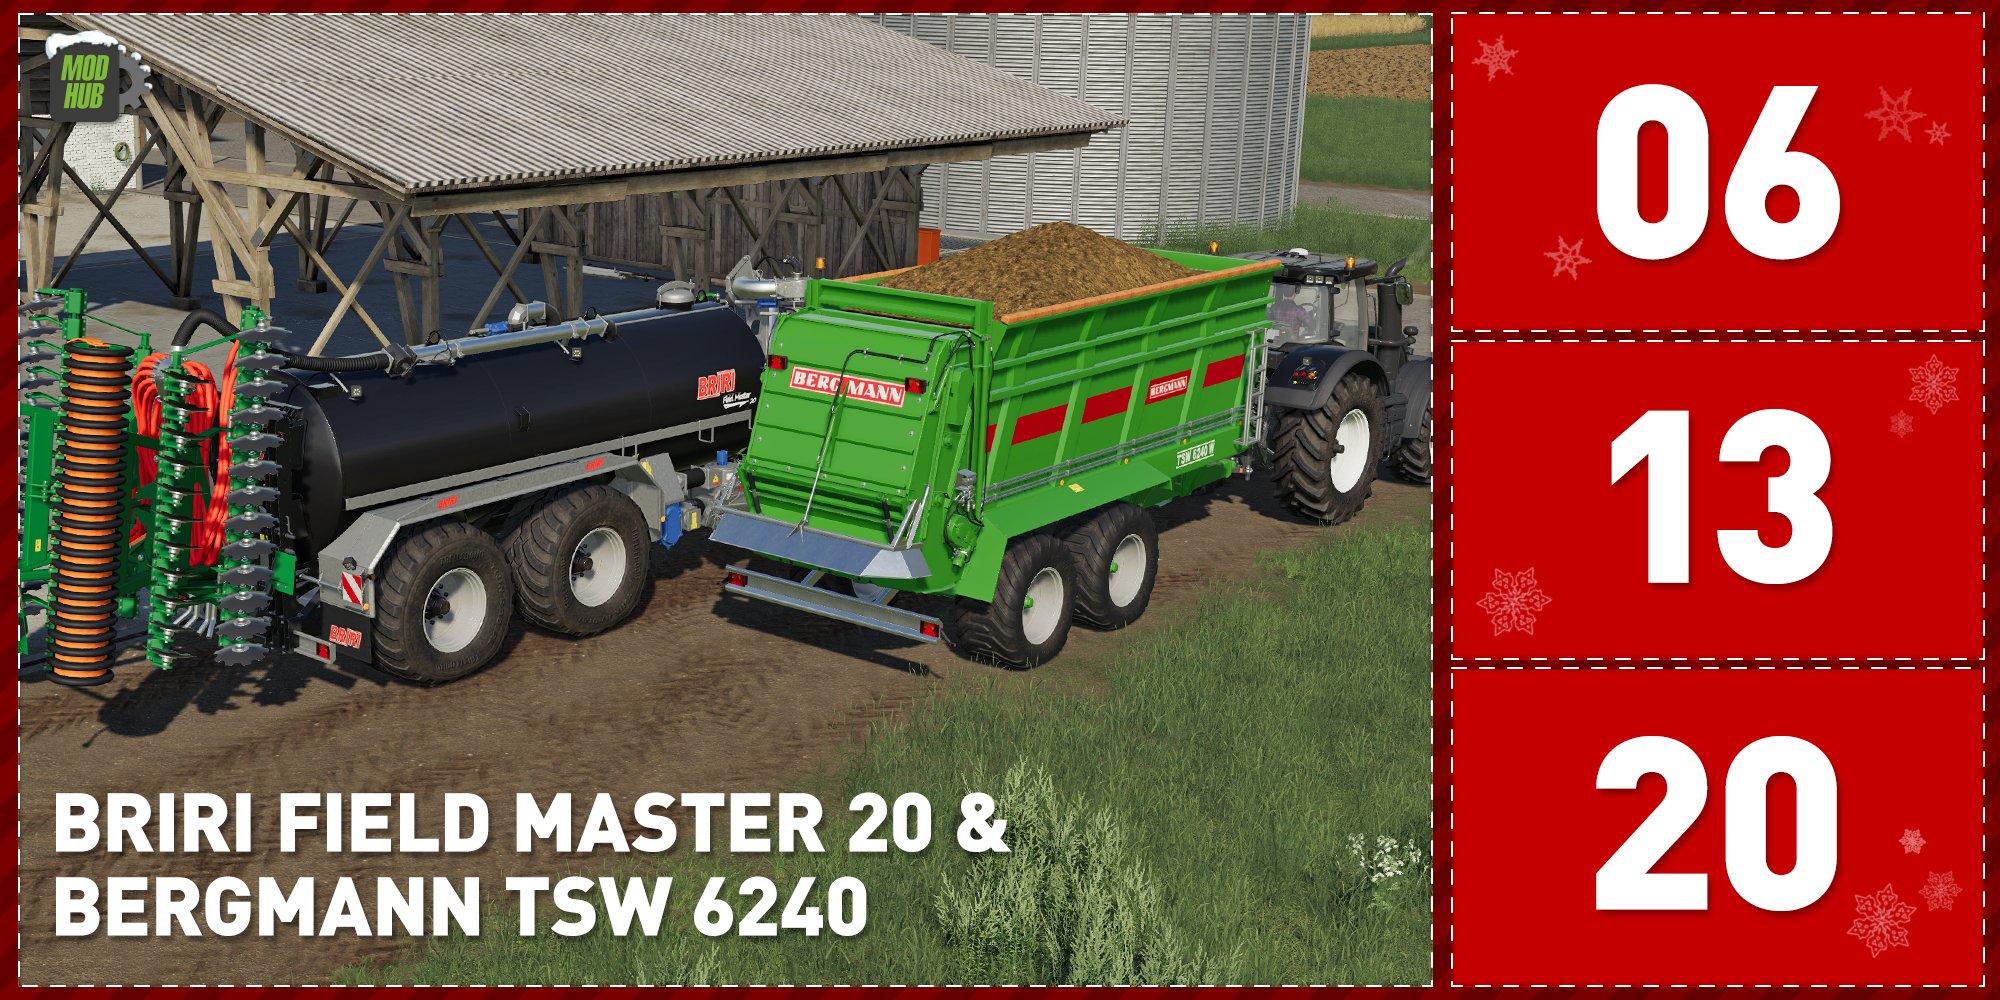 Farming Simulator on Twitter: "You asked for them and for Christmas, we're  bringing them! In the next four weeks, we'll release the Agritechnica Mods  to the InGame Modhub of FS19. Today we're